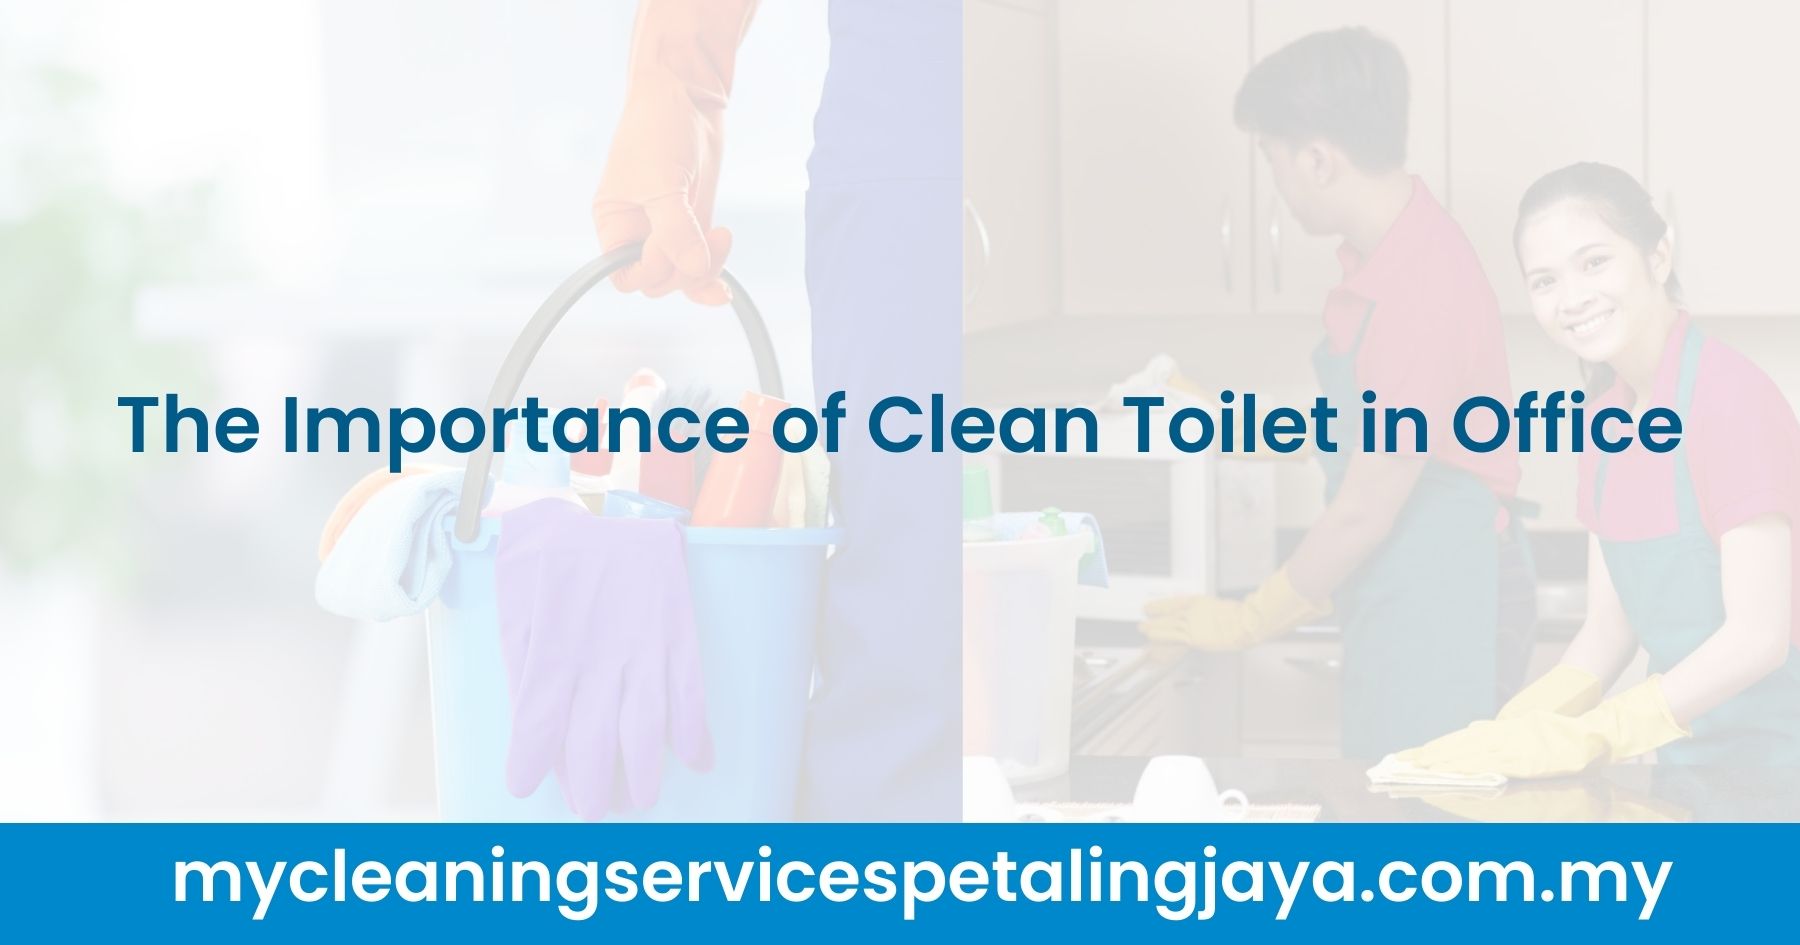 The Importance of Clean Toilet in Office